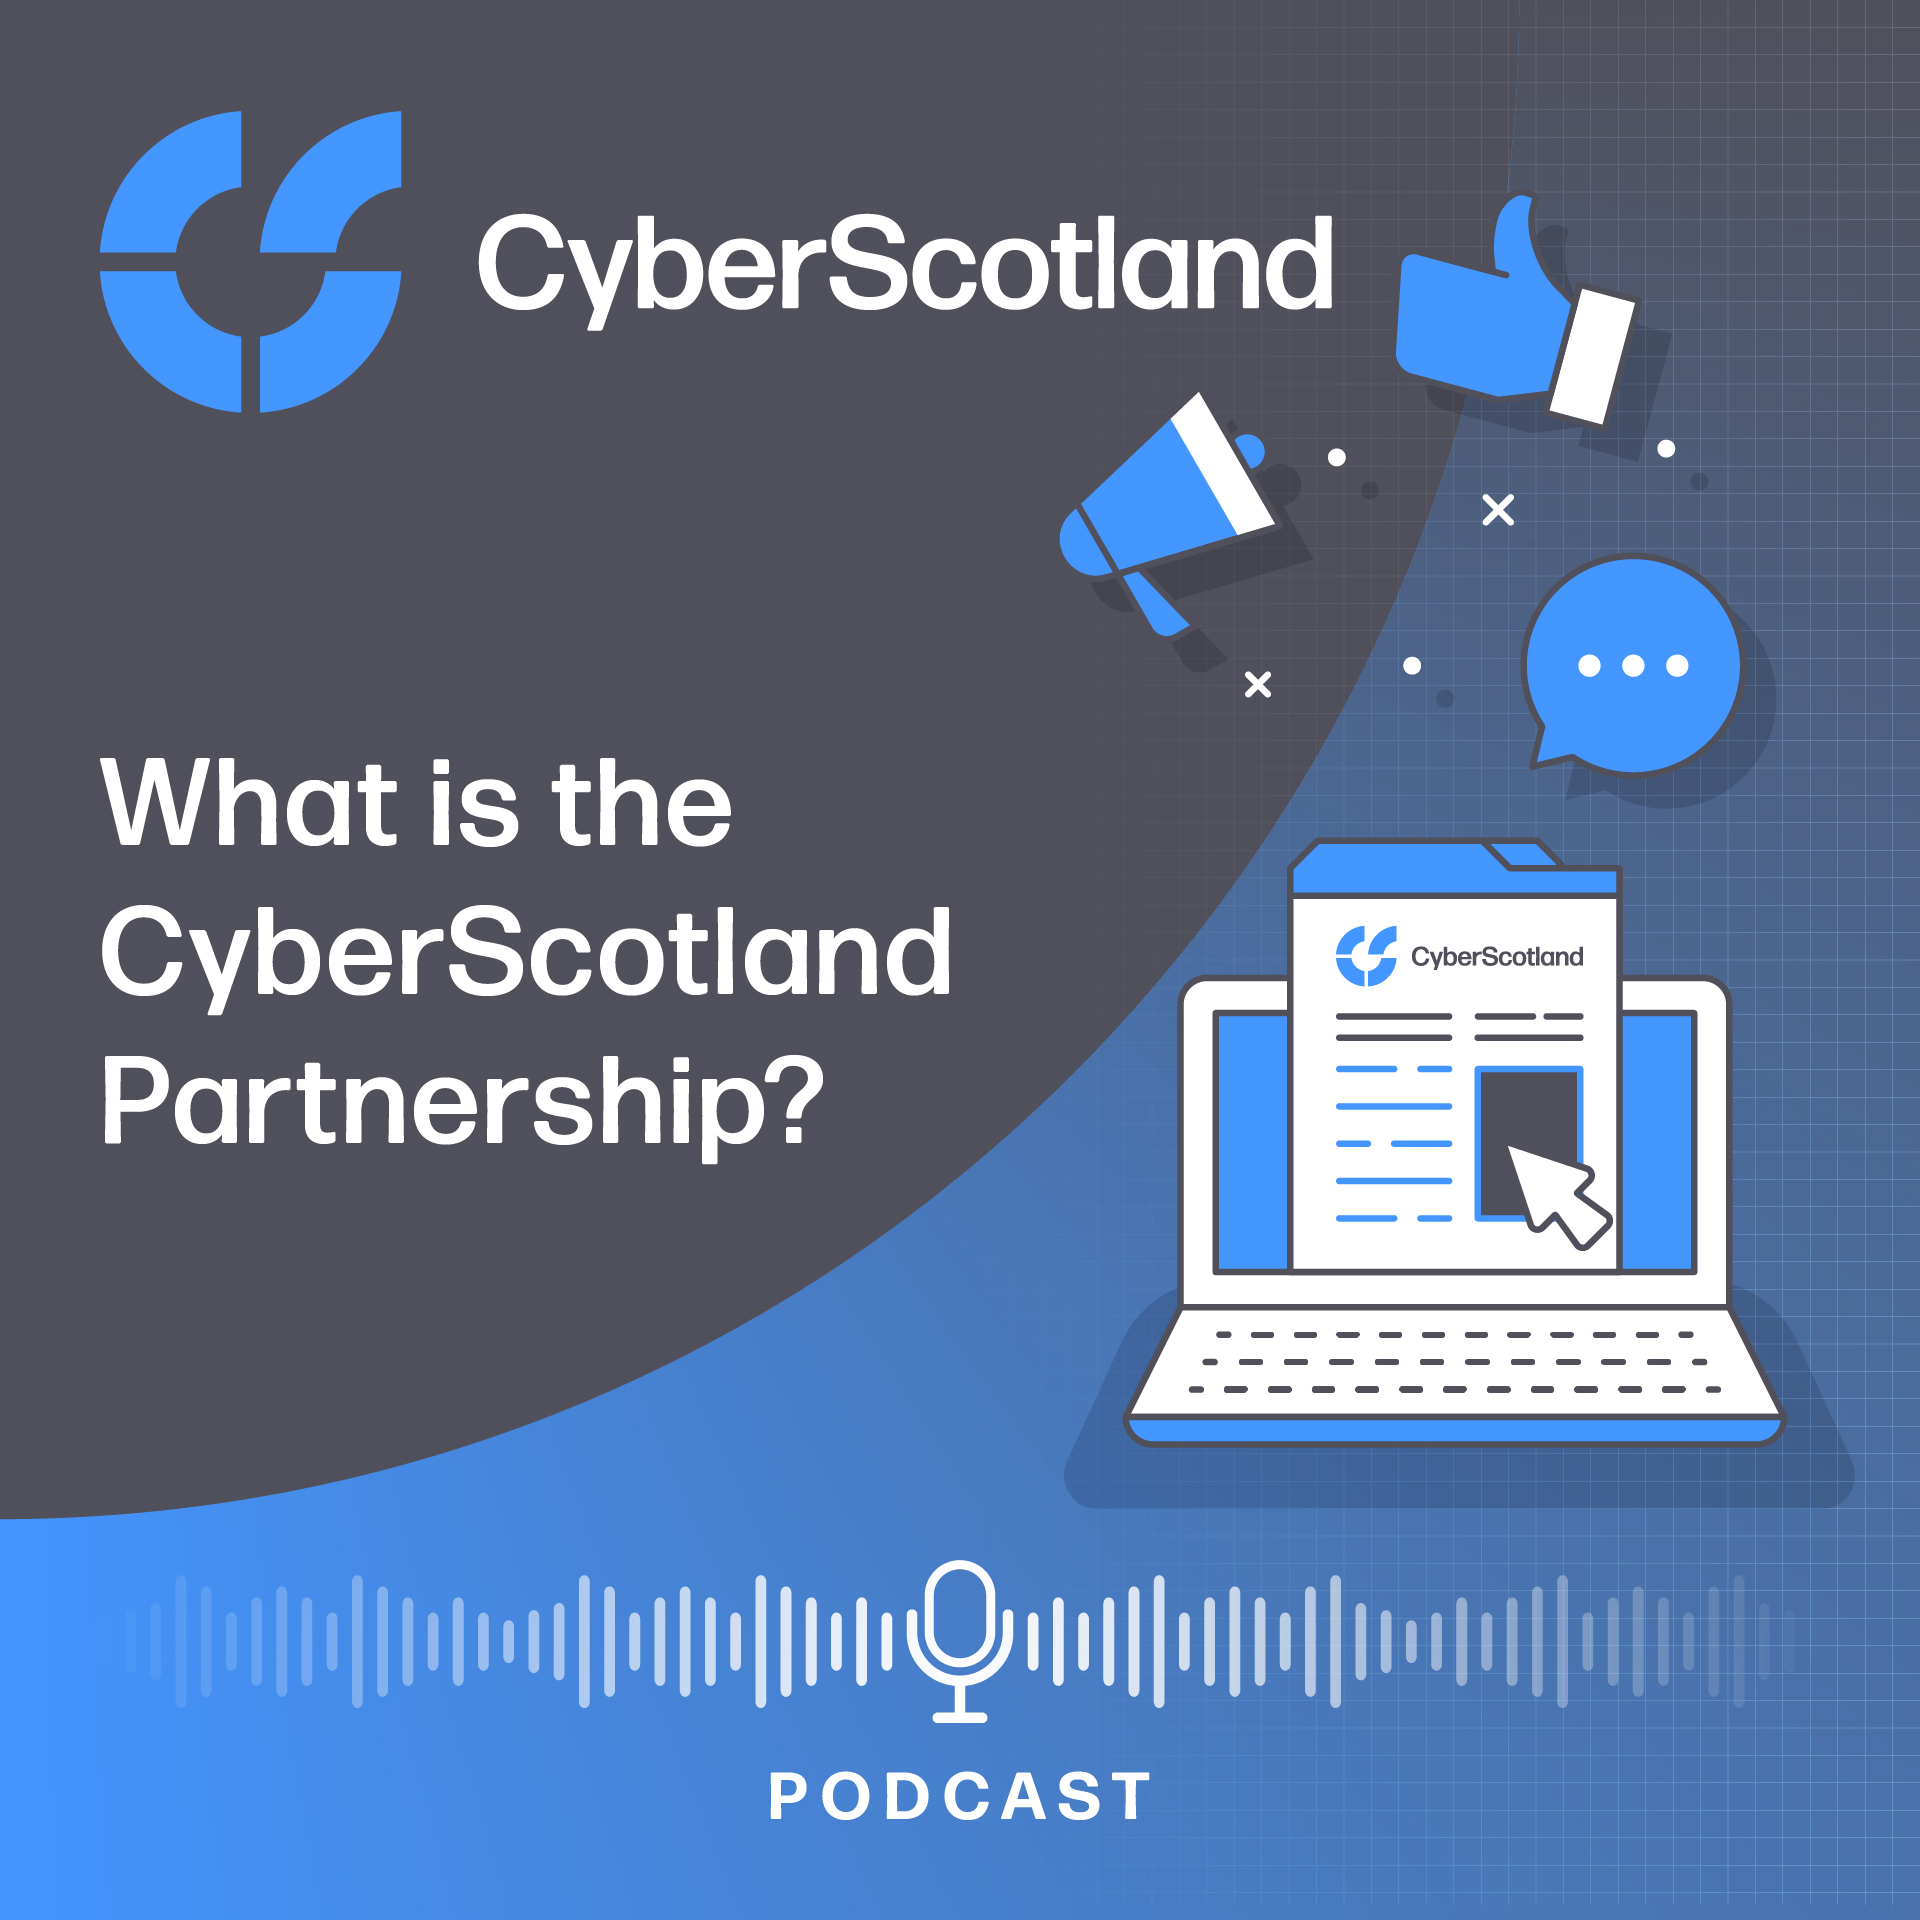 What is the CyberScotland Partnership?